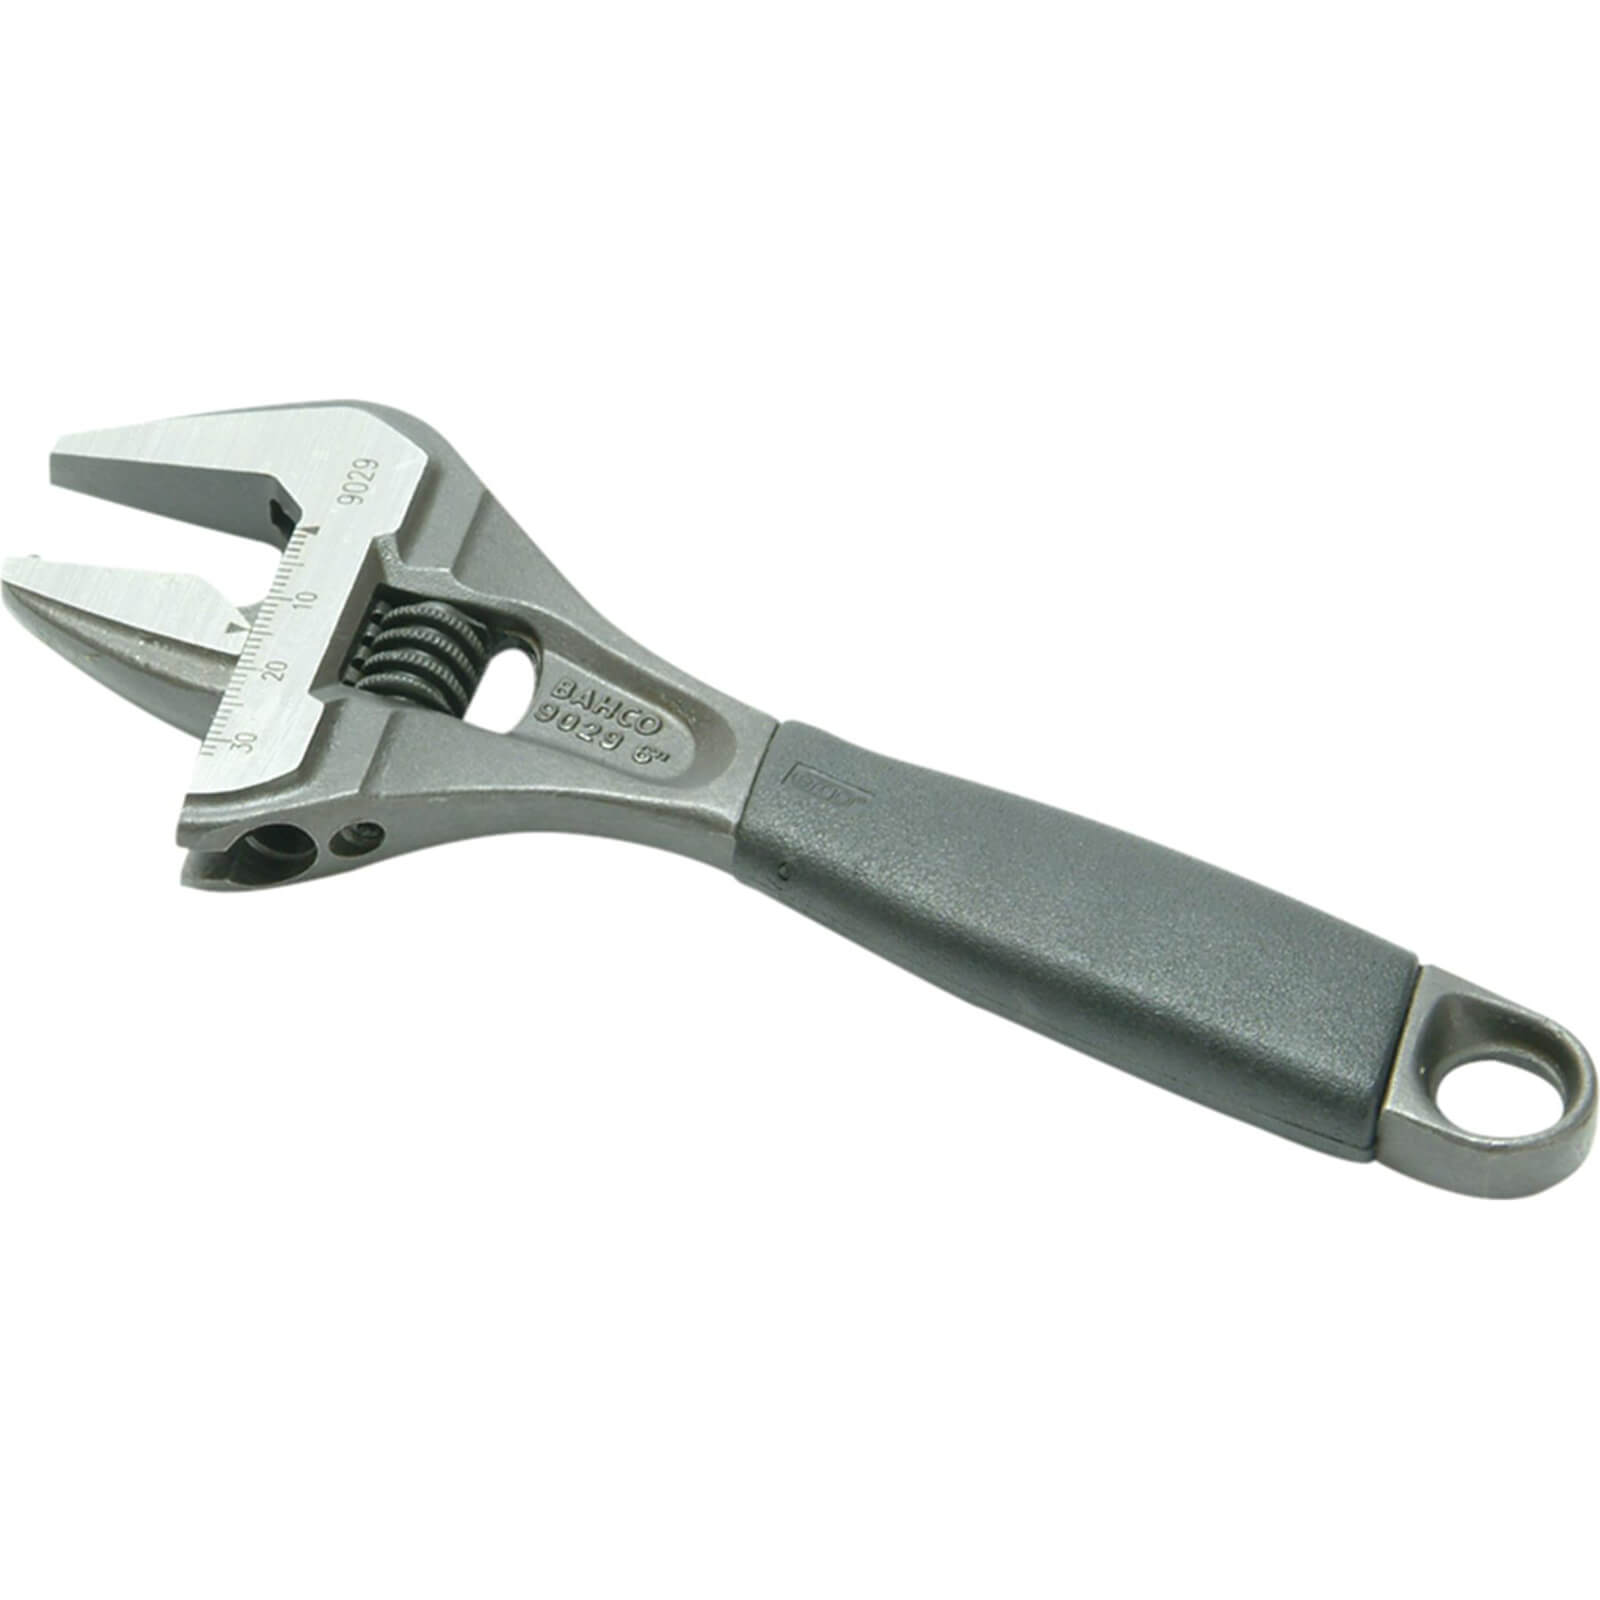 Image of Bahco 90 Series Ergo Adjustable Spanner Wide Jaw 150mm